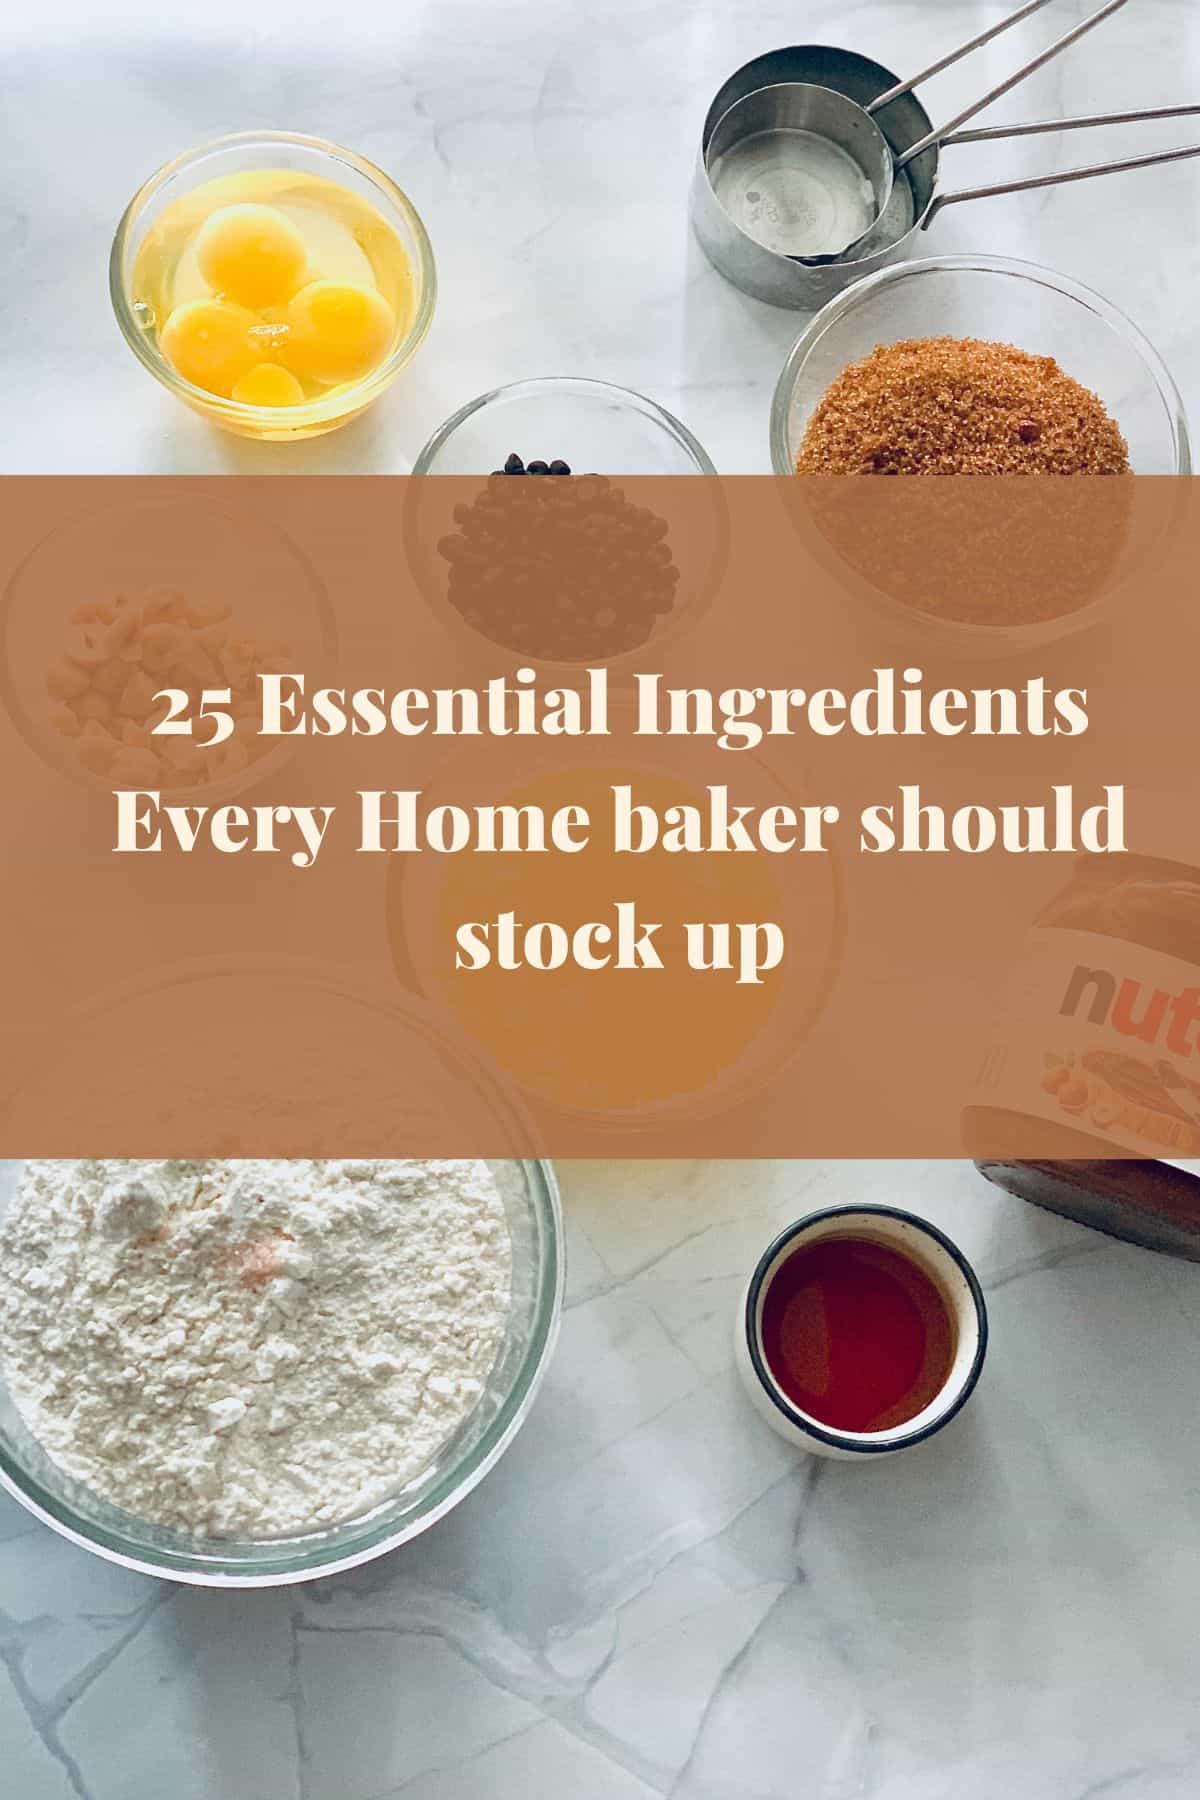 7 Top Baking Ingredients and Supplies Bakers Want in 2023